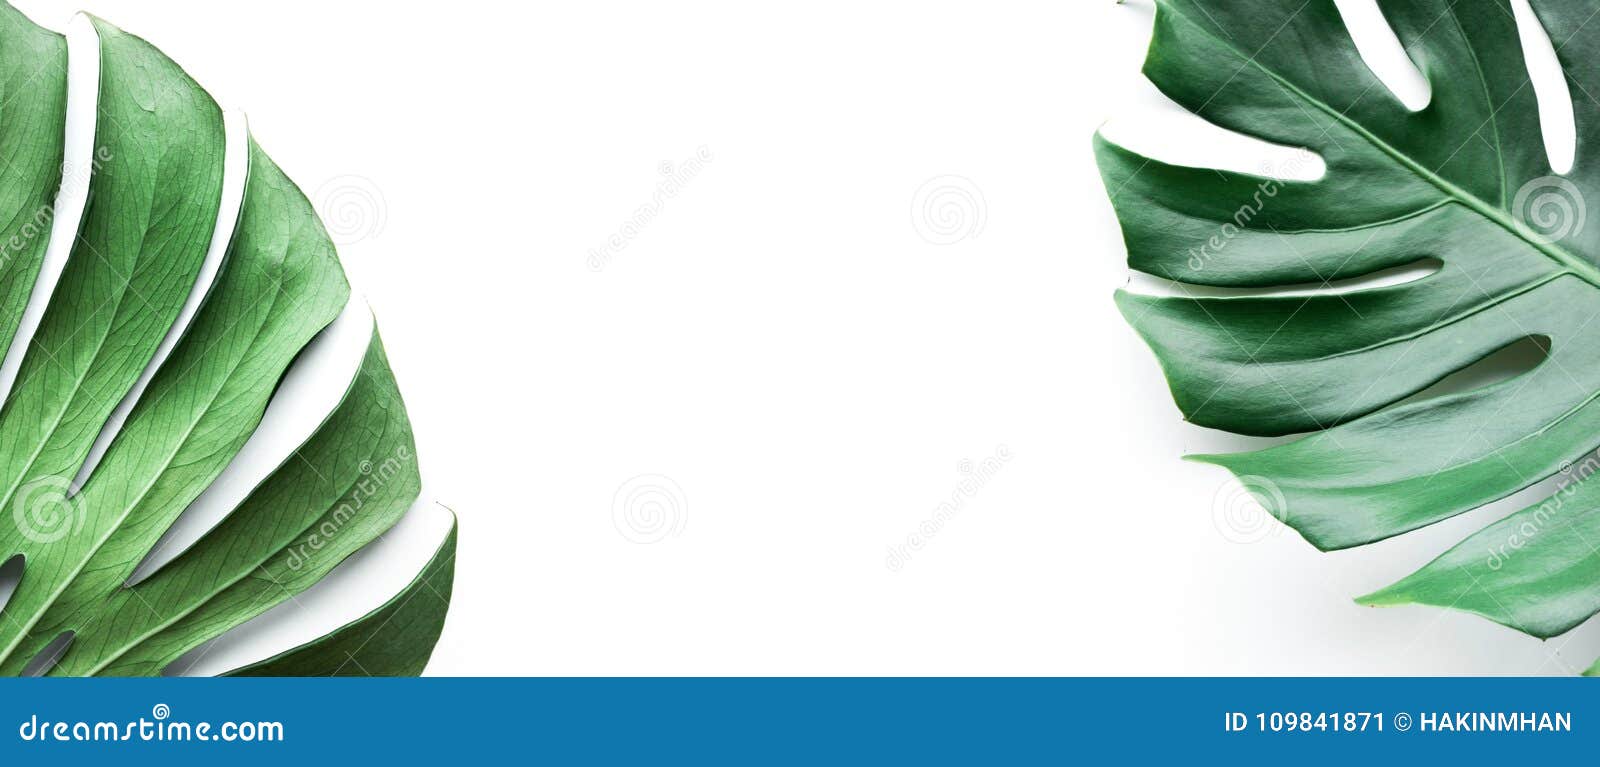 real monstera leaves set on white background.